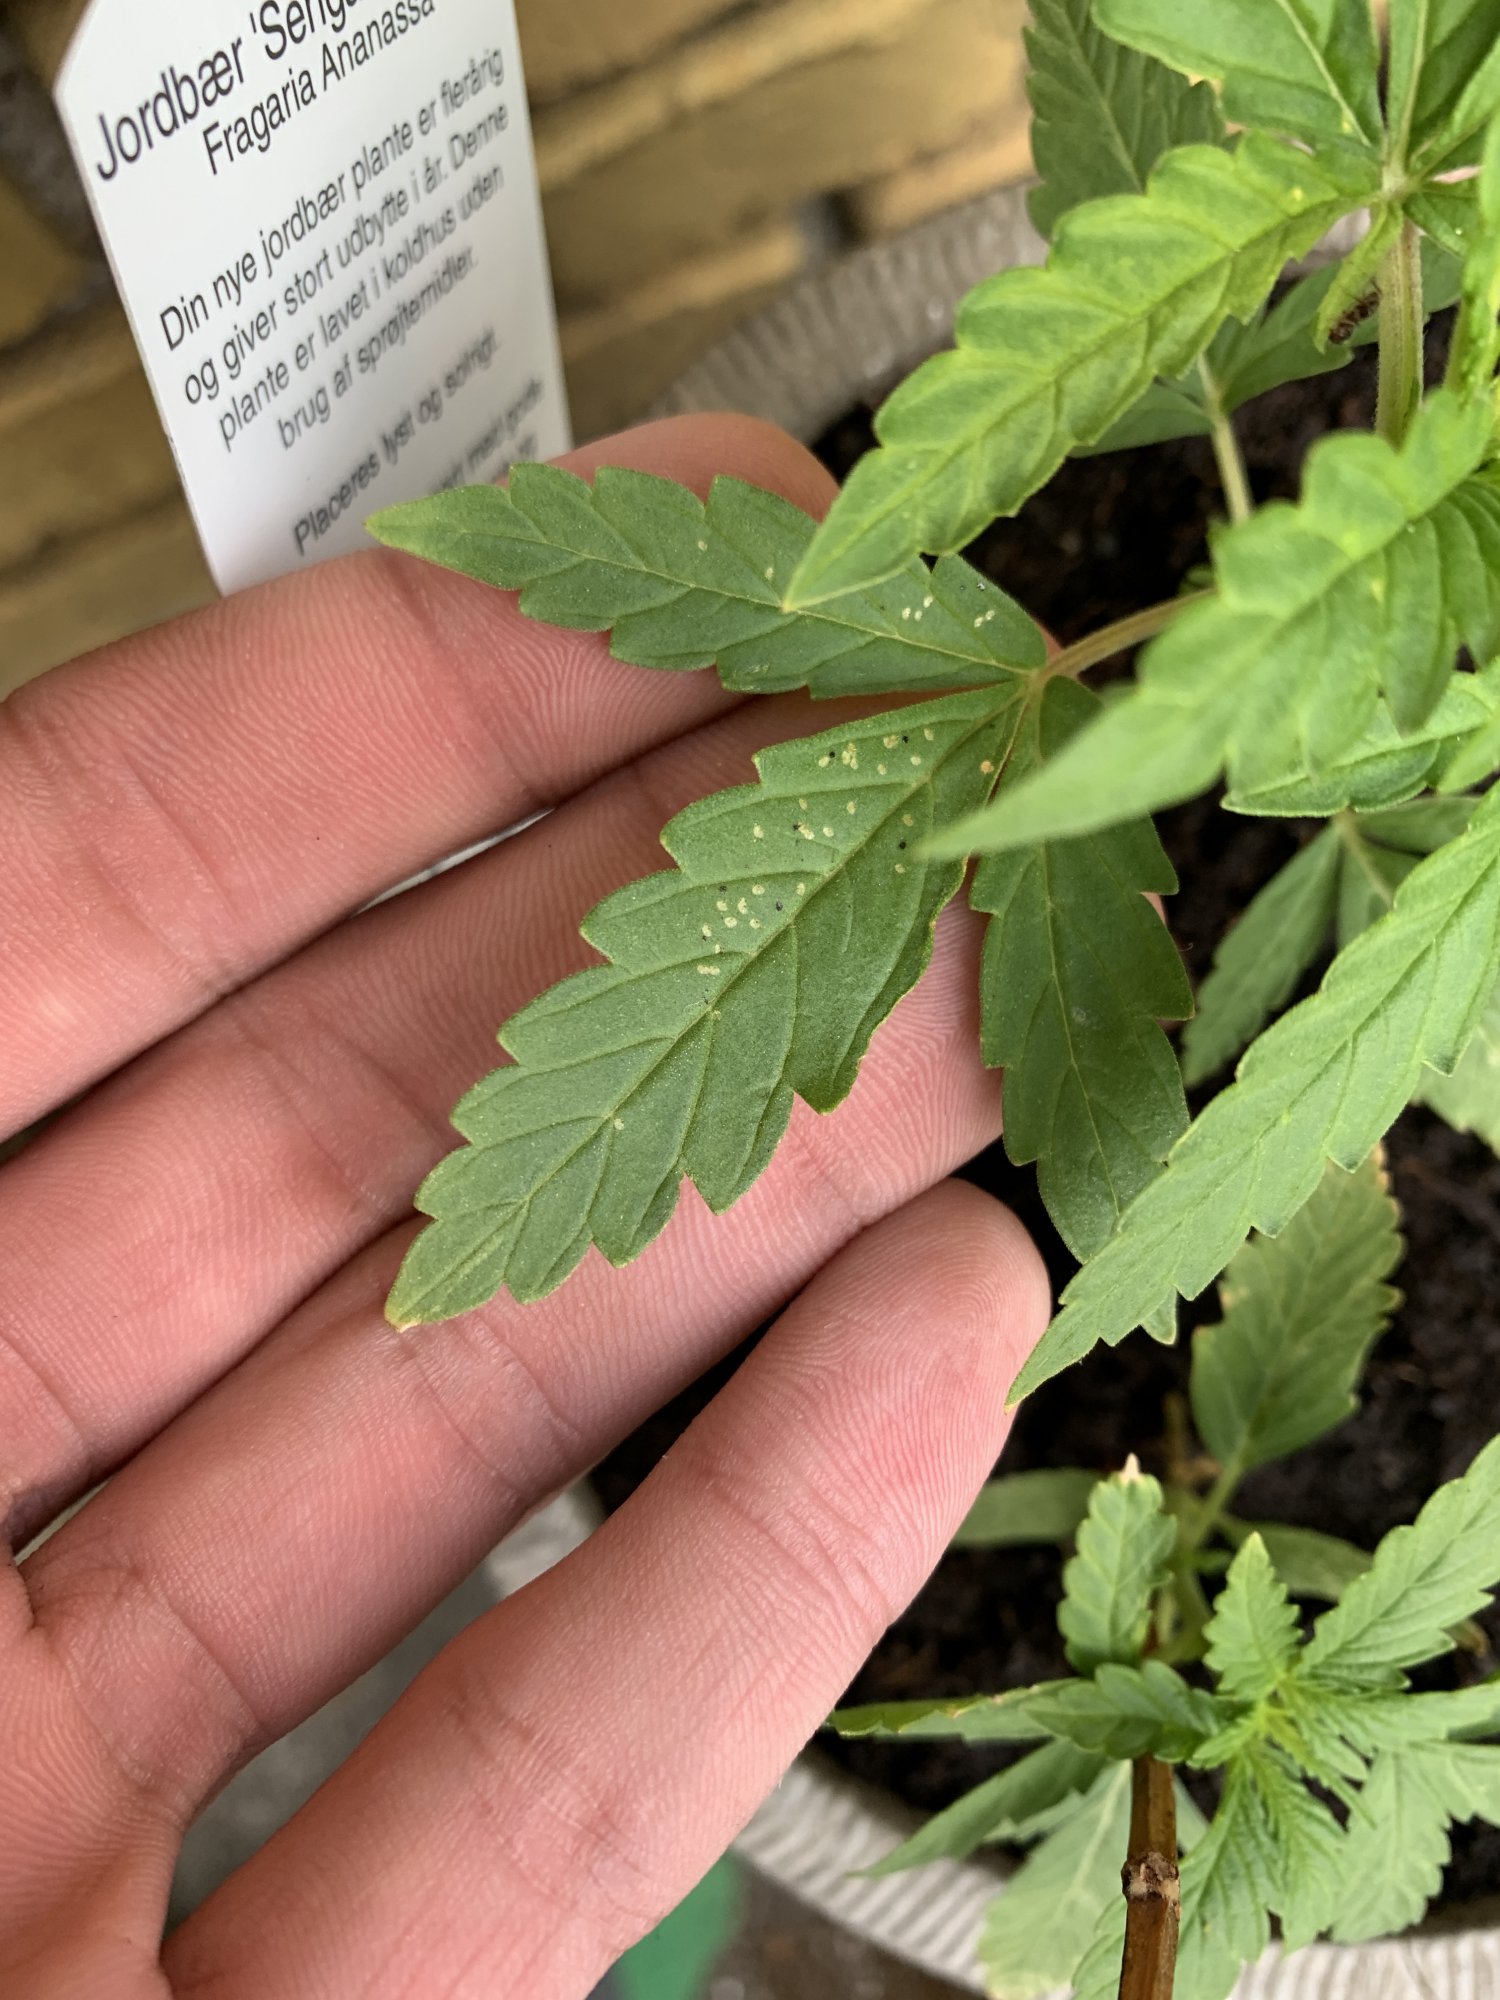 White and black dots on leafs help